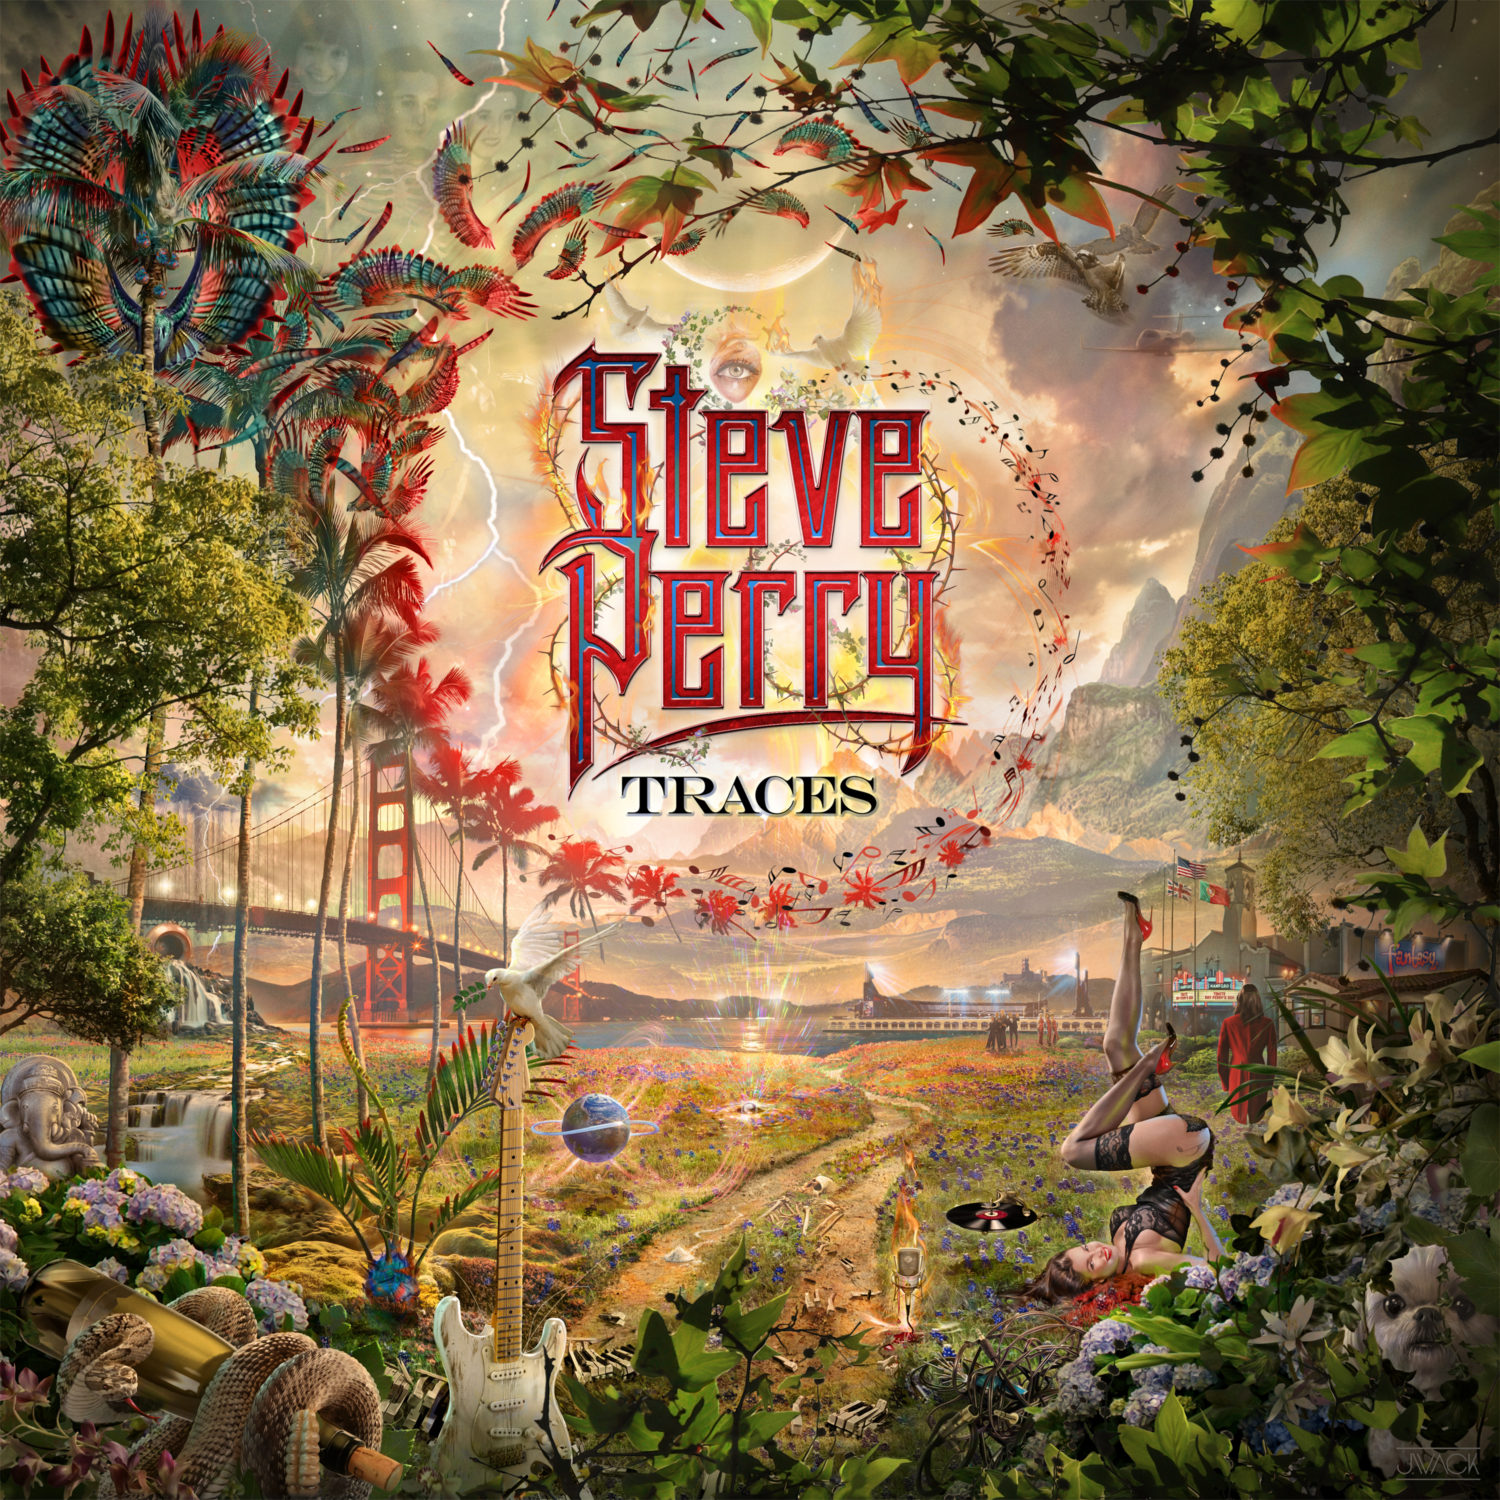 Steve Perry - Tracce